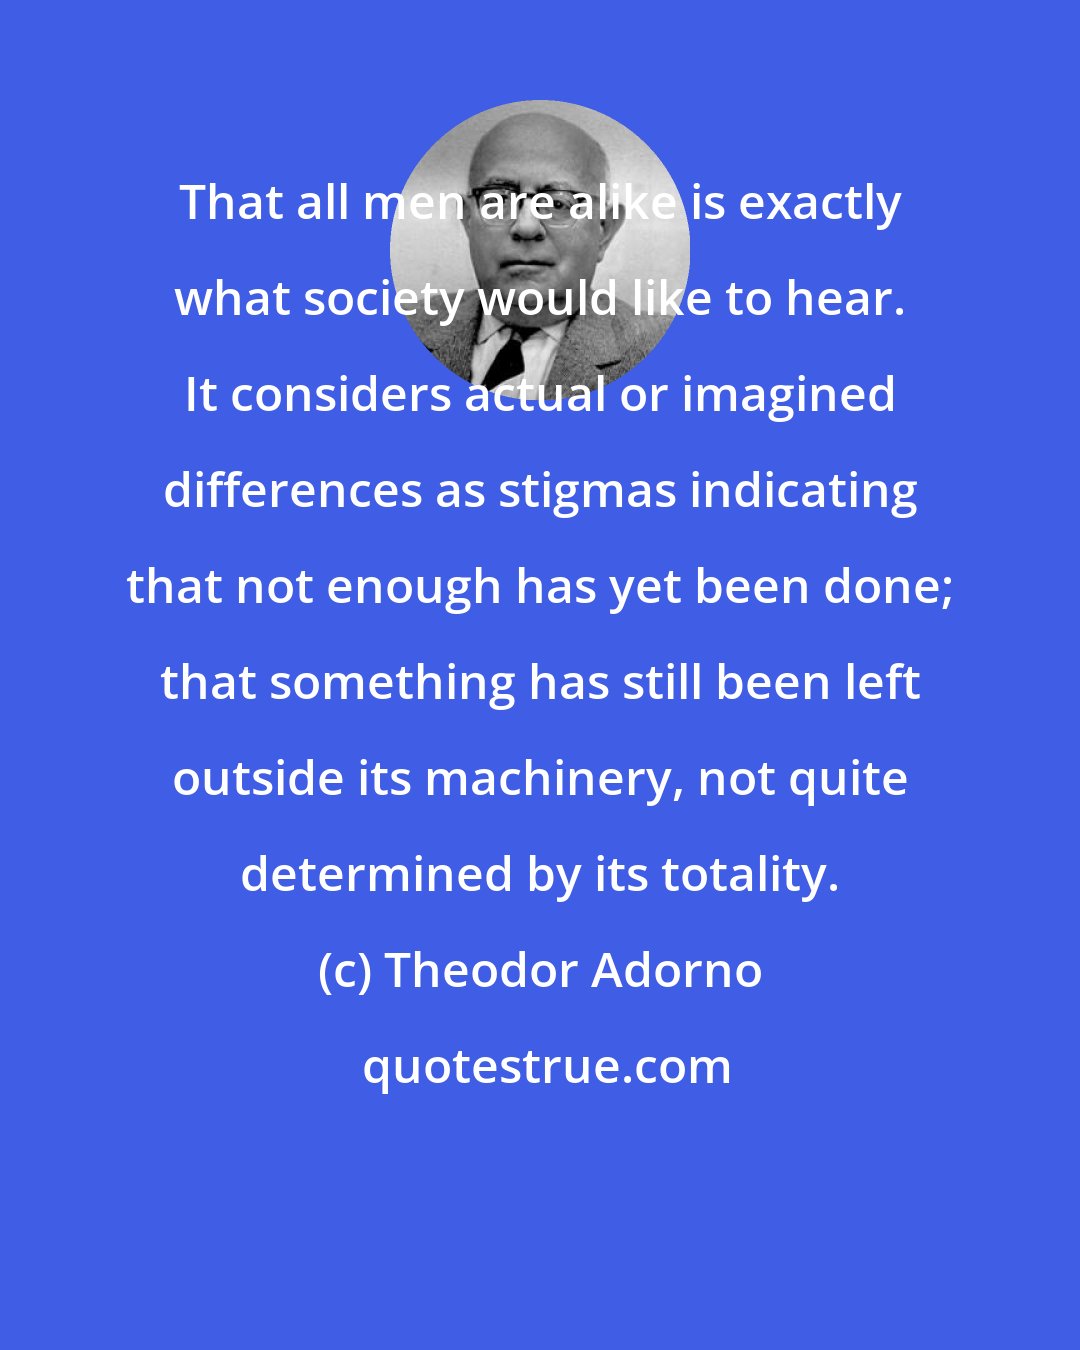 Theodor Adorno: That all men are alike is exactly what society would like to hear. It considers actual or imagined differences as stigmas indicating that not enough has yet been done; that something has still been left outside its machinery, not quite determined by its totality.